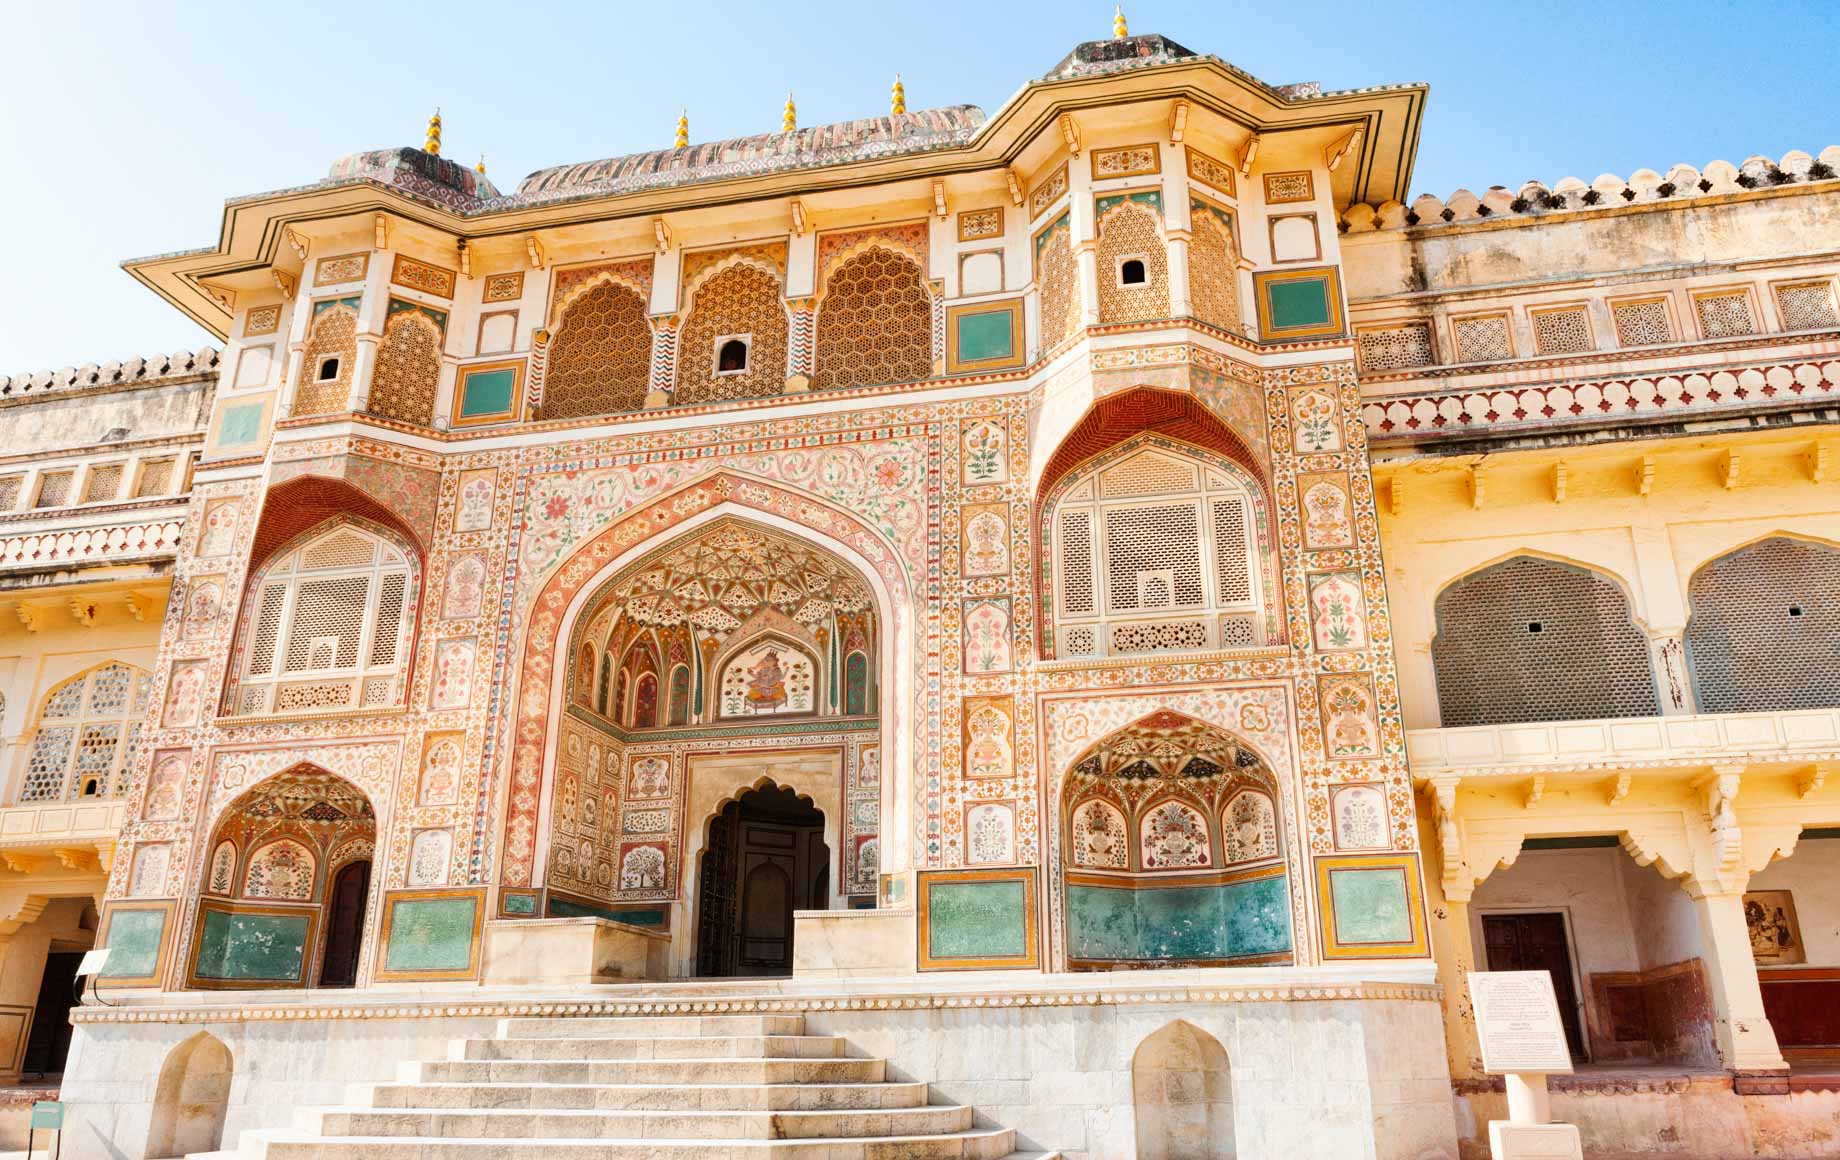 Amazing palace with traditional designs in Jaipur